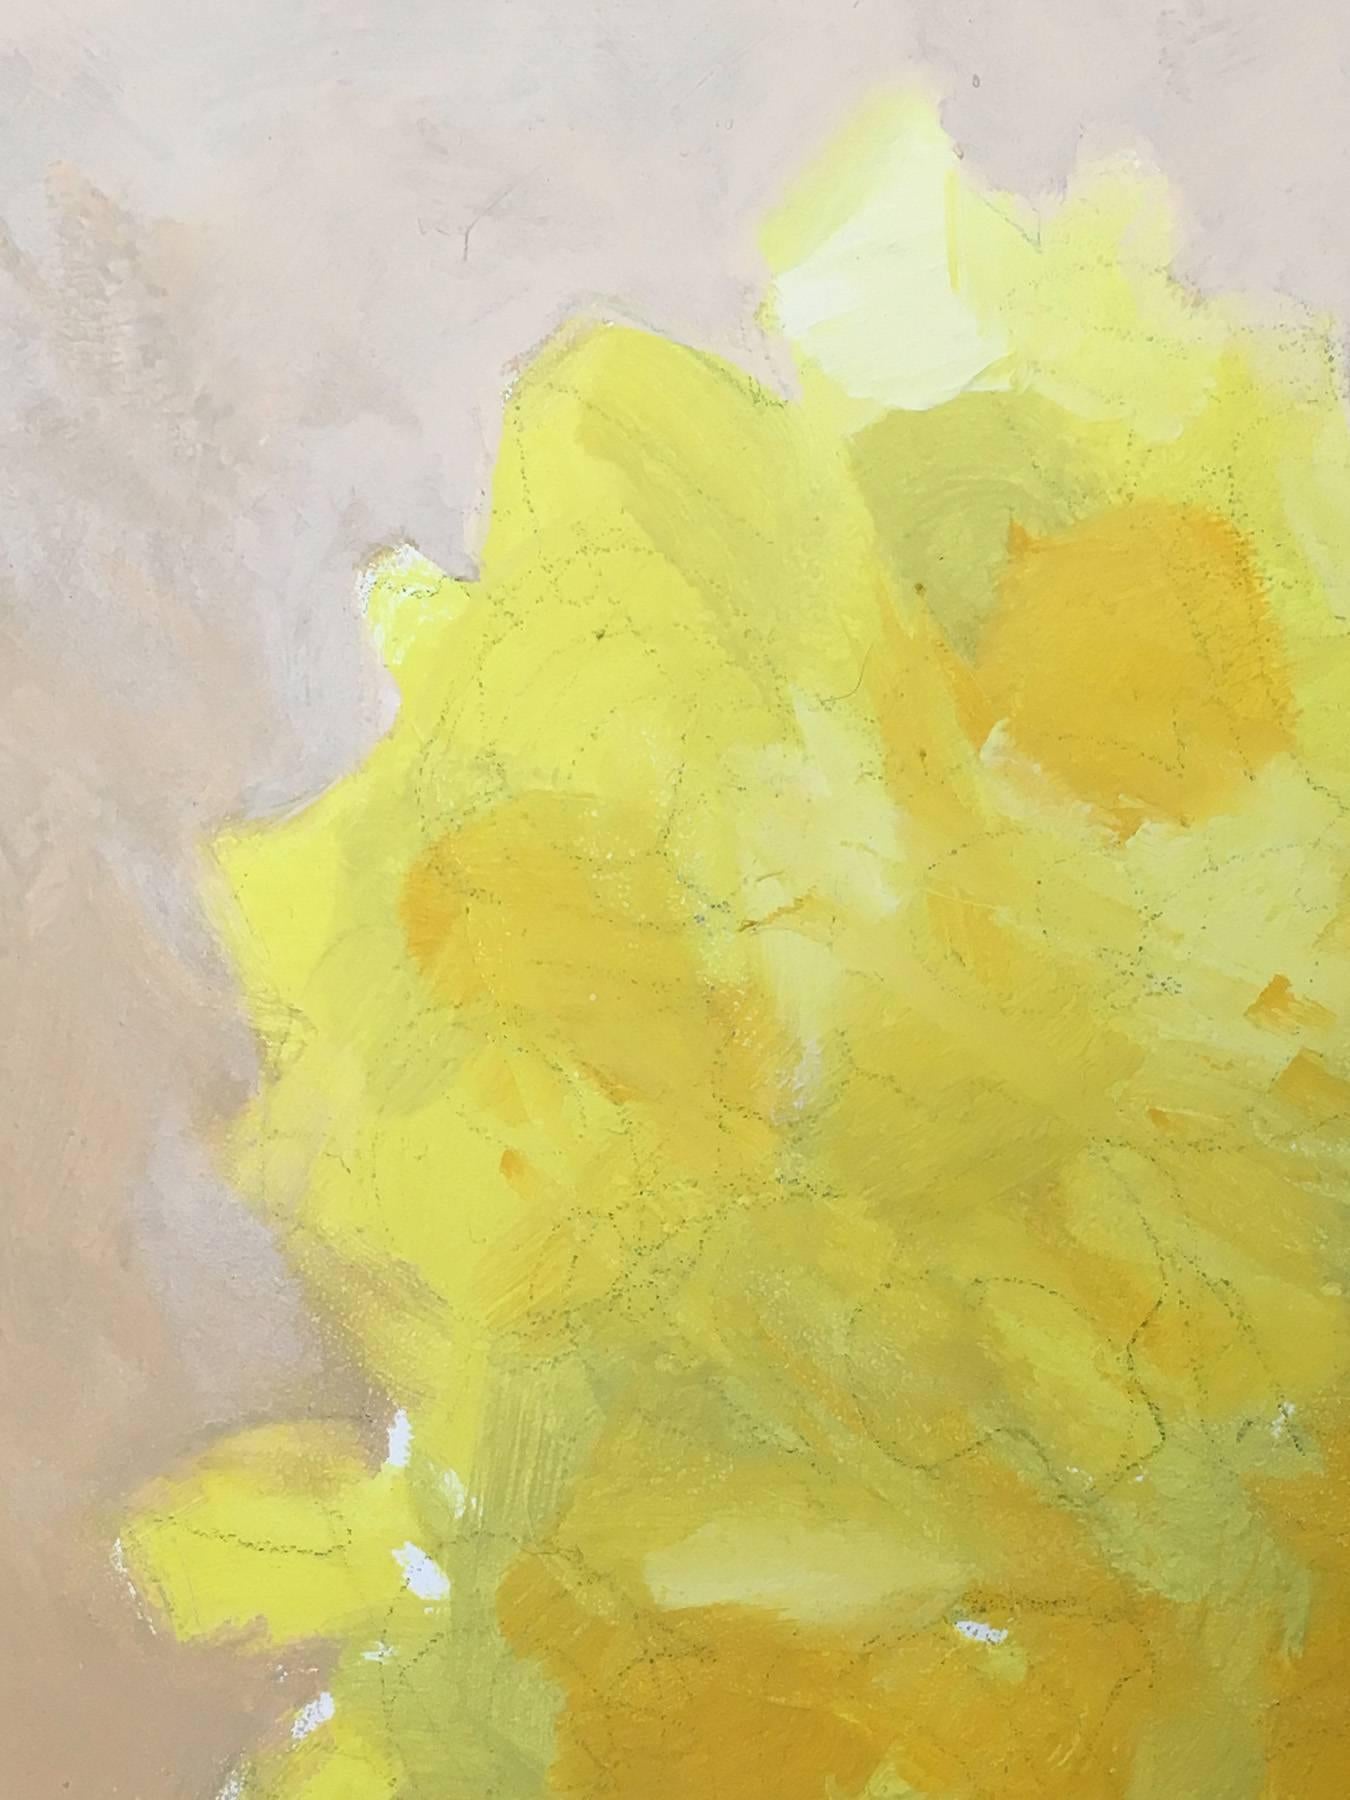 James Wilson Rayen's Flower #3 (Yellow Flower) is a delicate and nuanced treatment of daffodils in a simple white vase in oil paint on board. This intimately-sized oil painting, 14 x 11 x .75 inches, is one of a series of studies of blossoms,